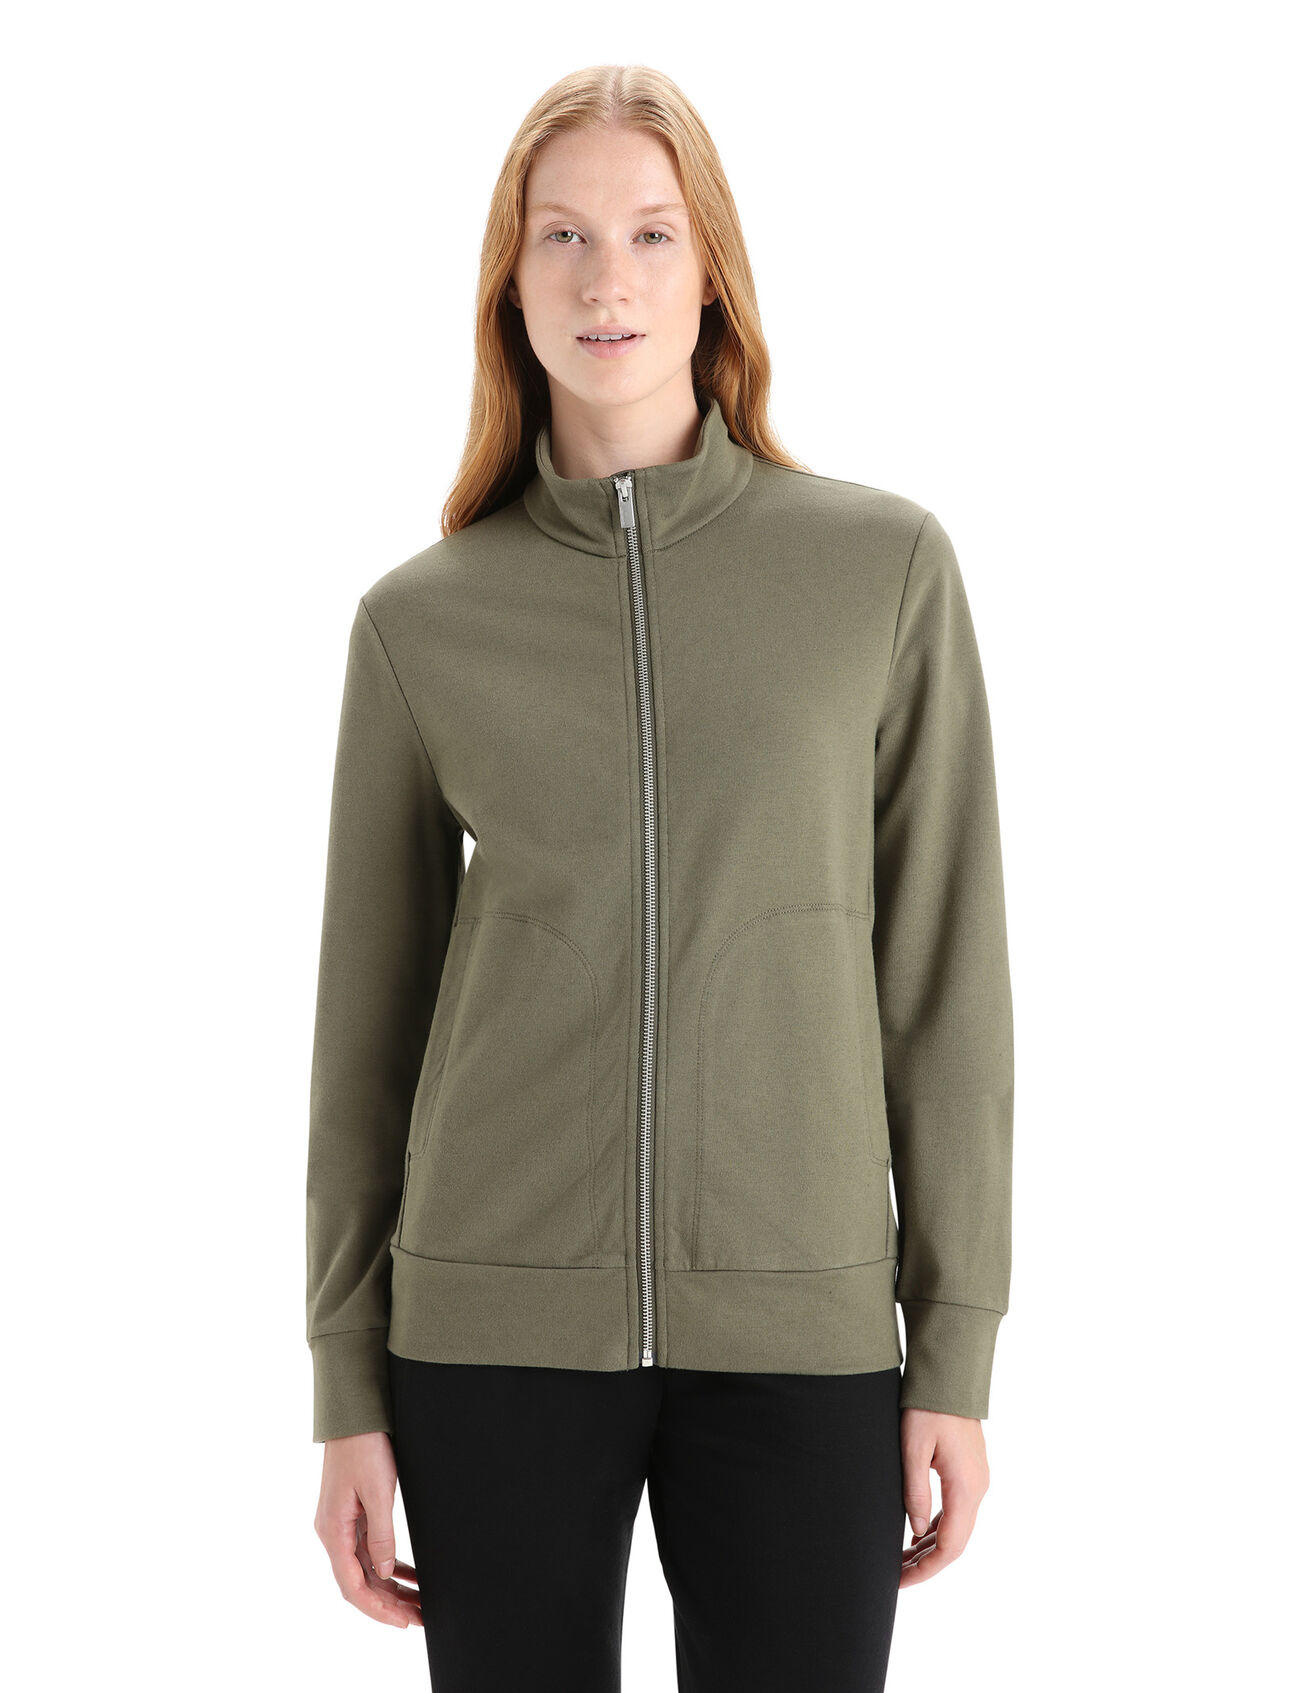 Womens Merino Central Classic Long Sleeve Zip Sweatshirt A stylish, classic and comfortable everyday sweatshirt that blends natural merino wool with organically grown cotton, the Central Classic Long Sleeve Zip is an everyday staple that's breathable and incredibly versatile.  